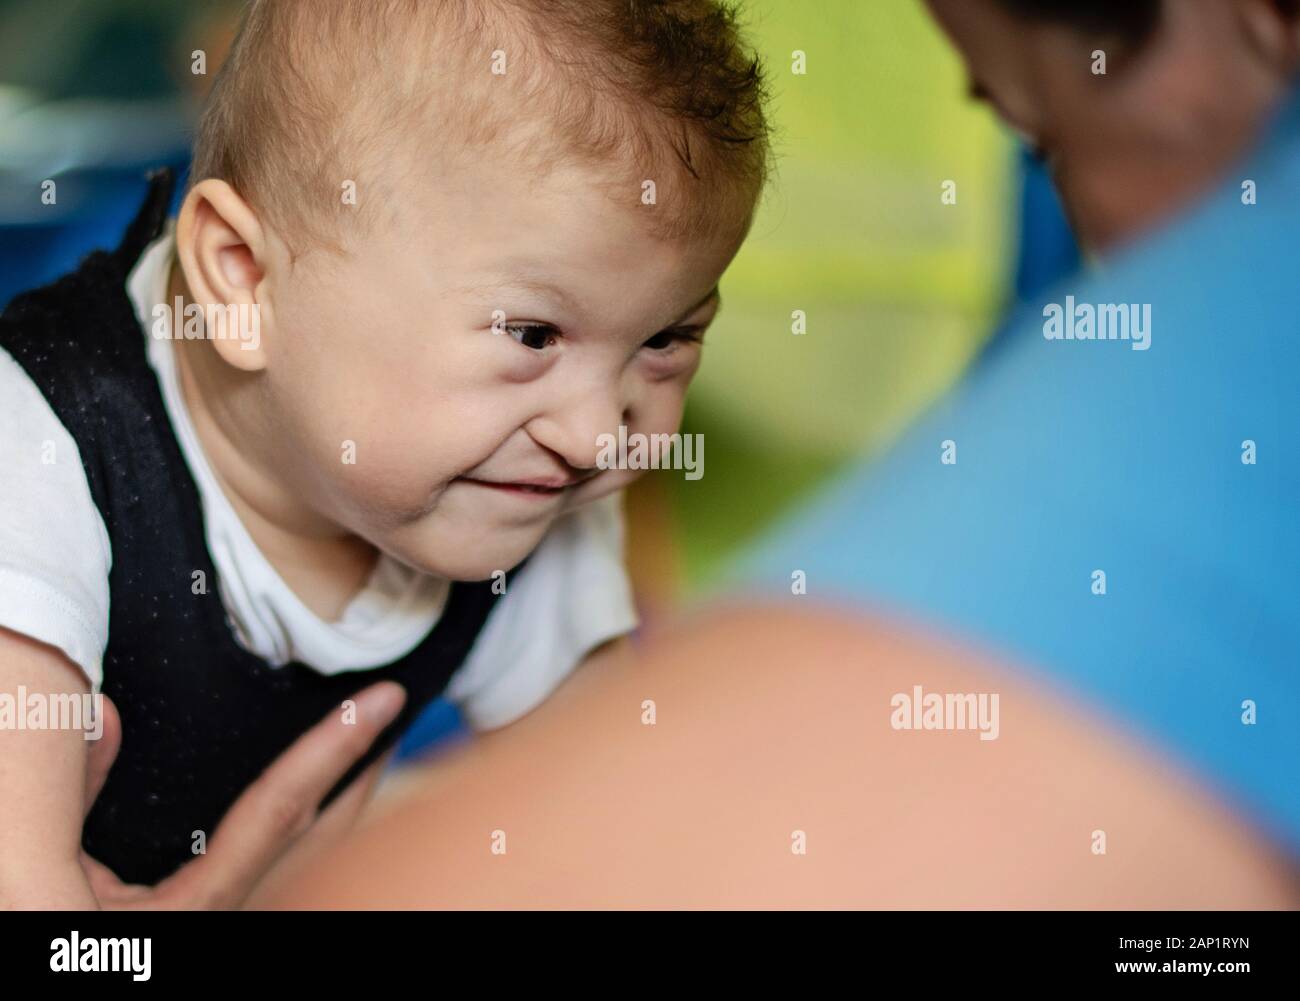 Portrait of a smiling baby with cerebral palsy on physiotherapy in a children therapy center. Boy with disability has therapy by doing exercises. Stock Photo